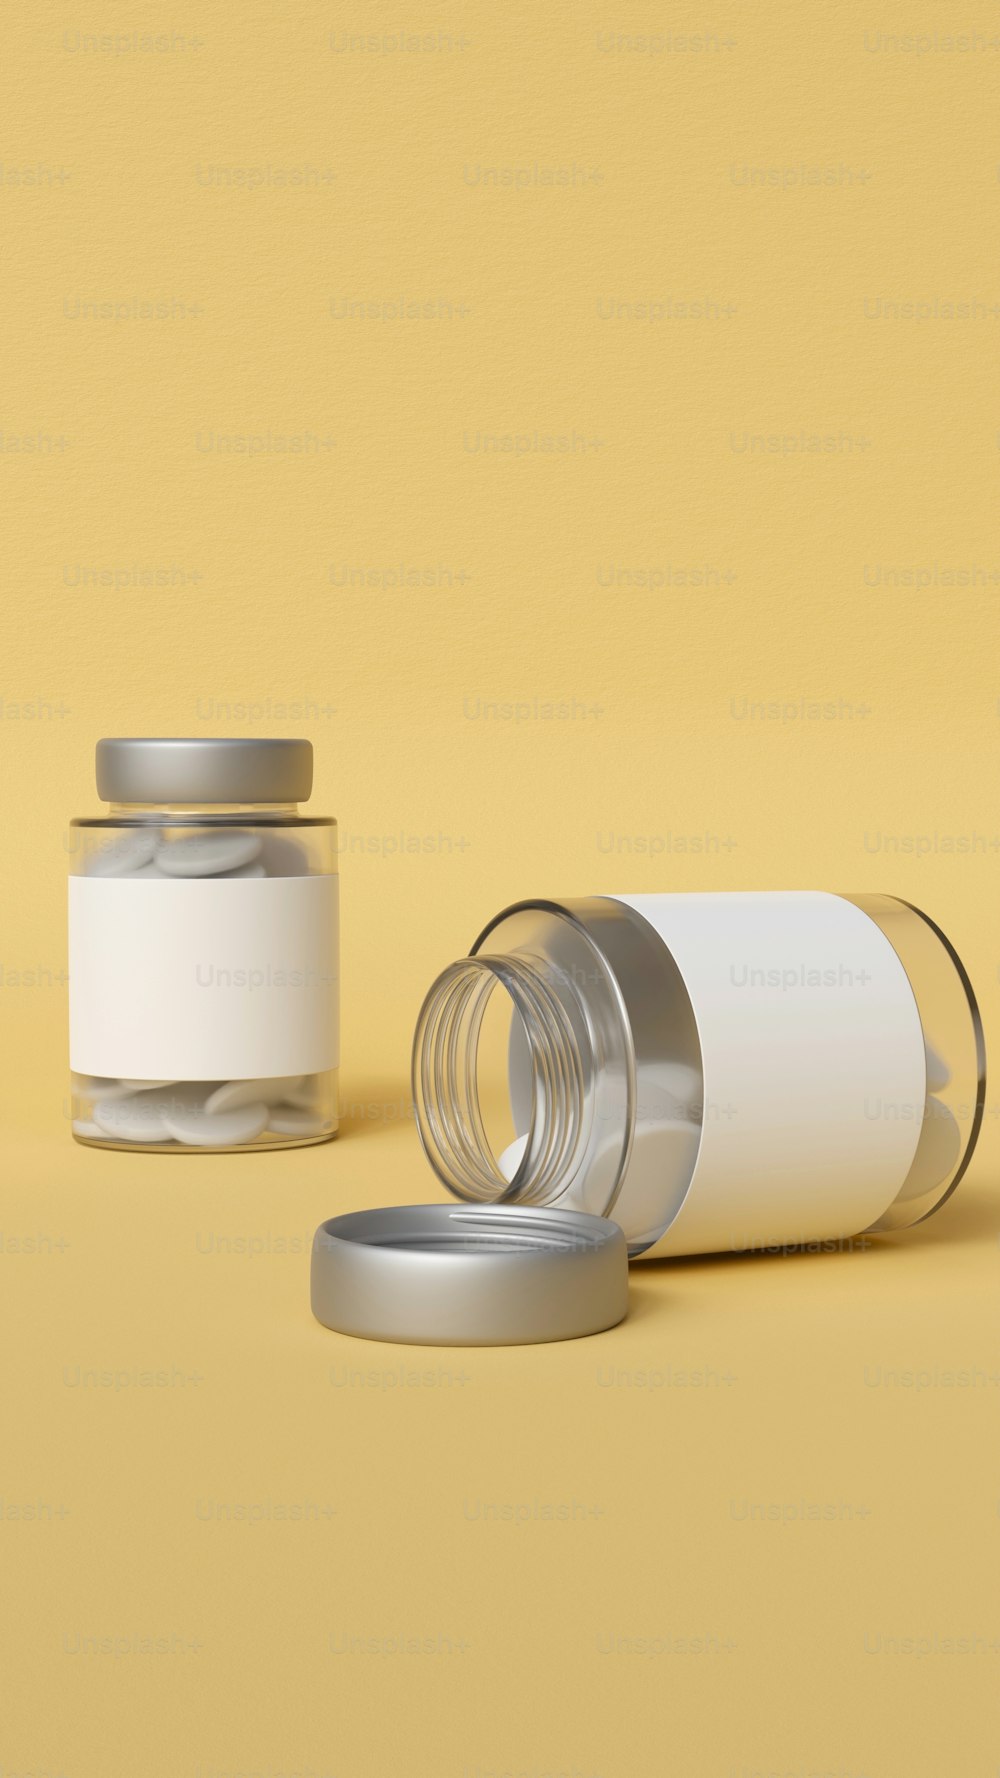 a jar with a lid and a container with a lid